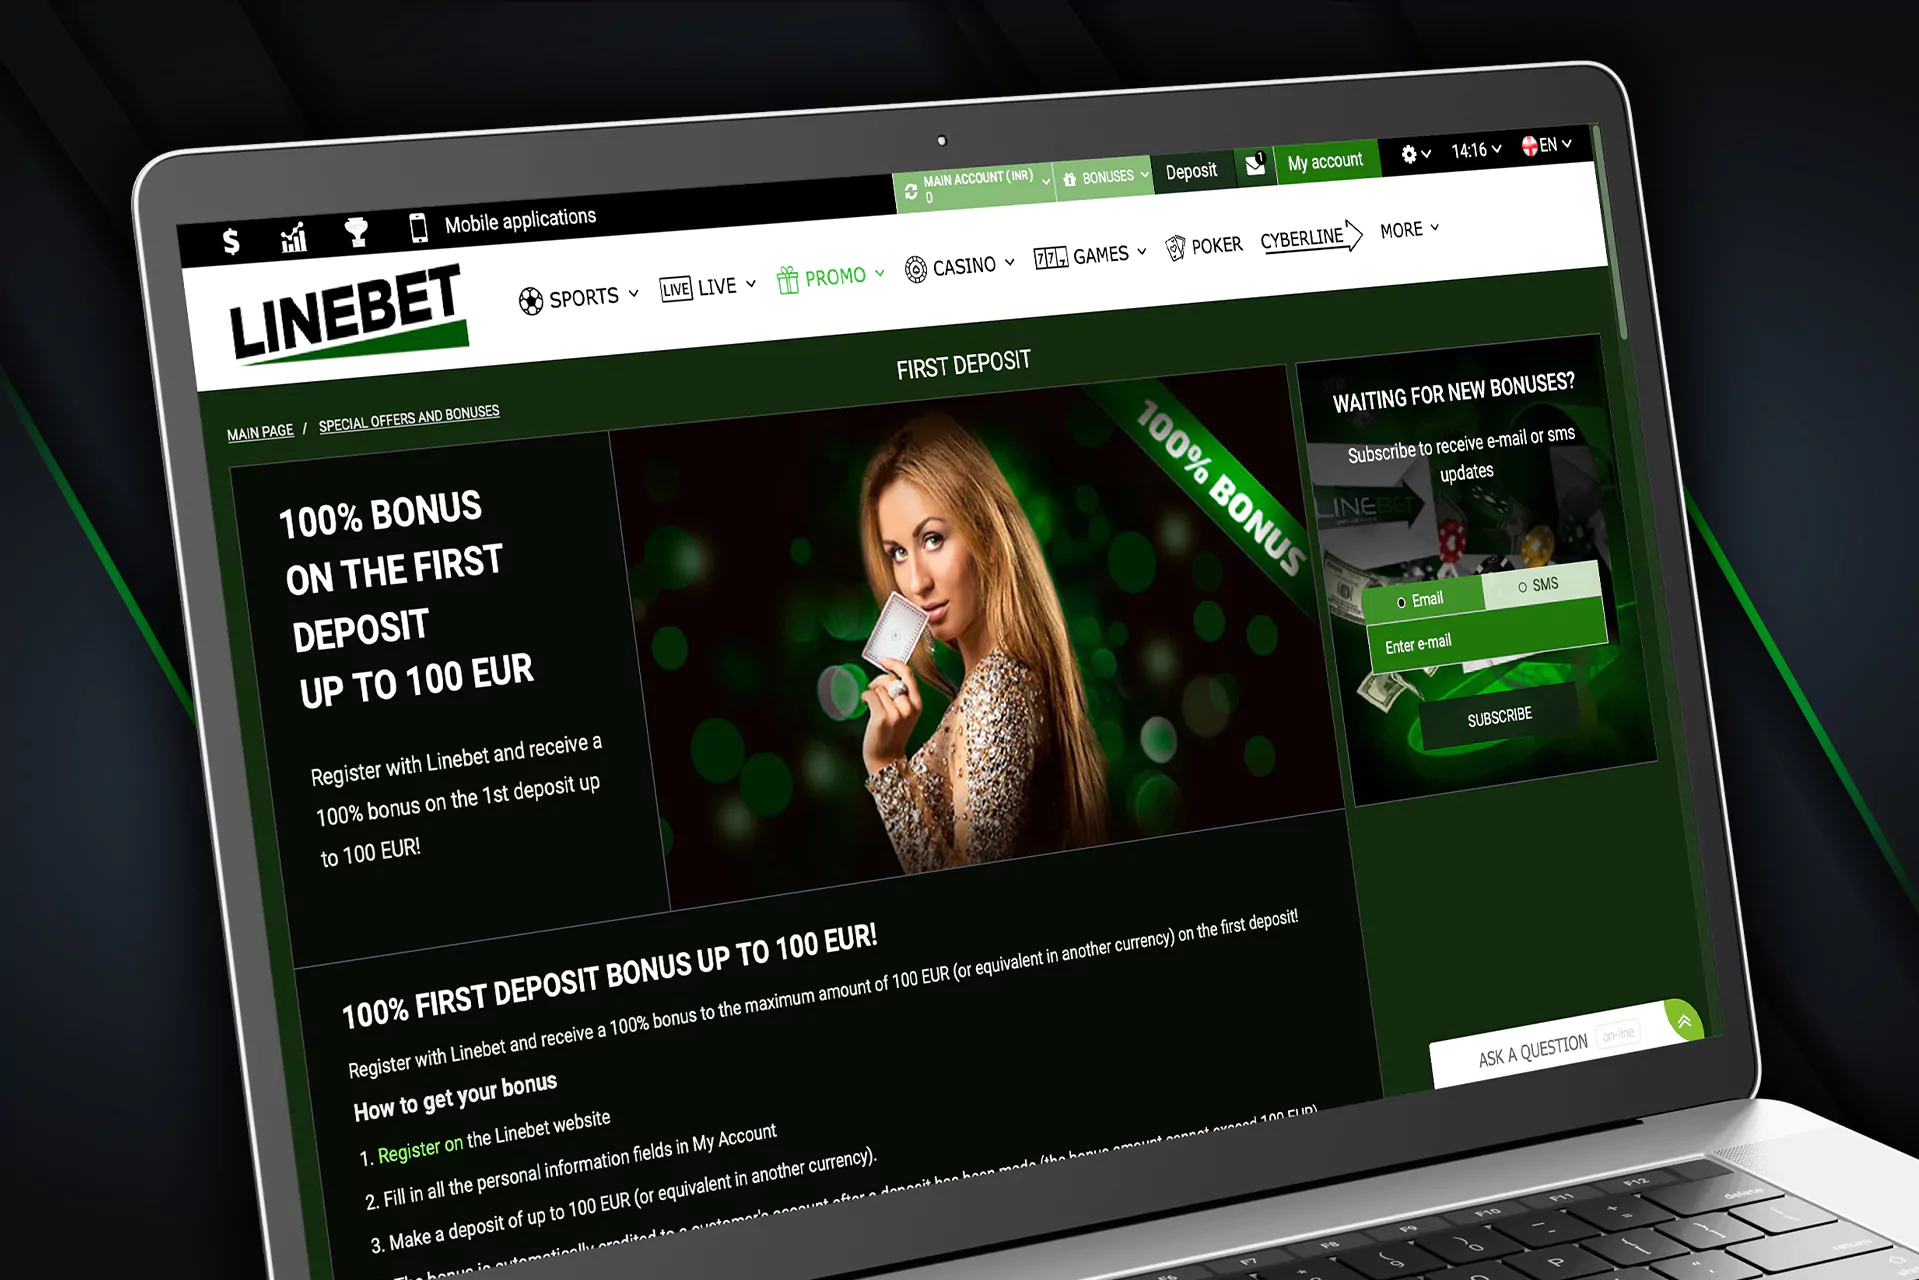 Top up your Linebet account and get up to 10,000.